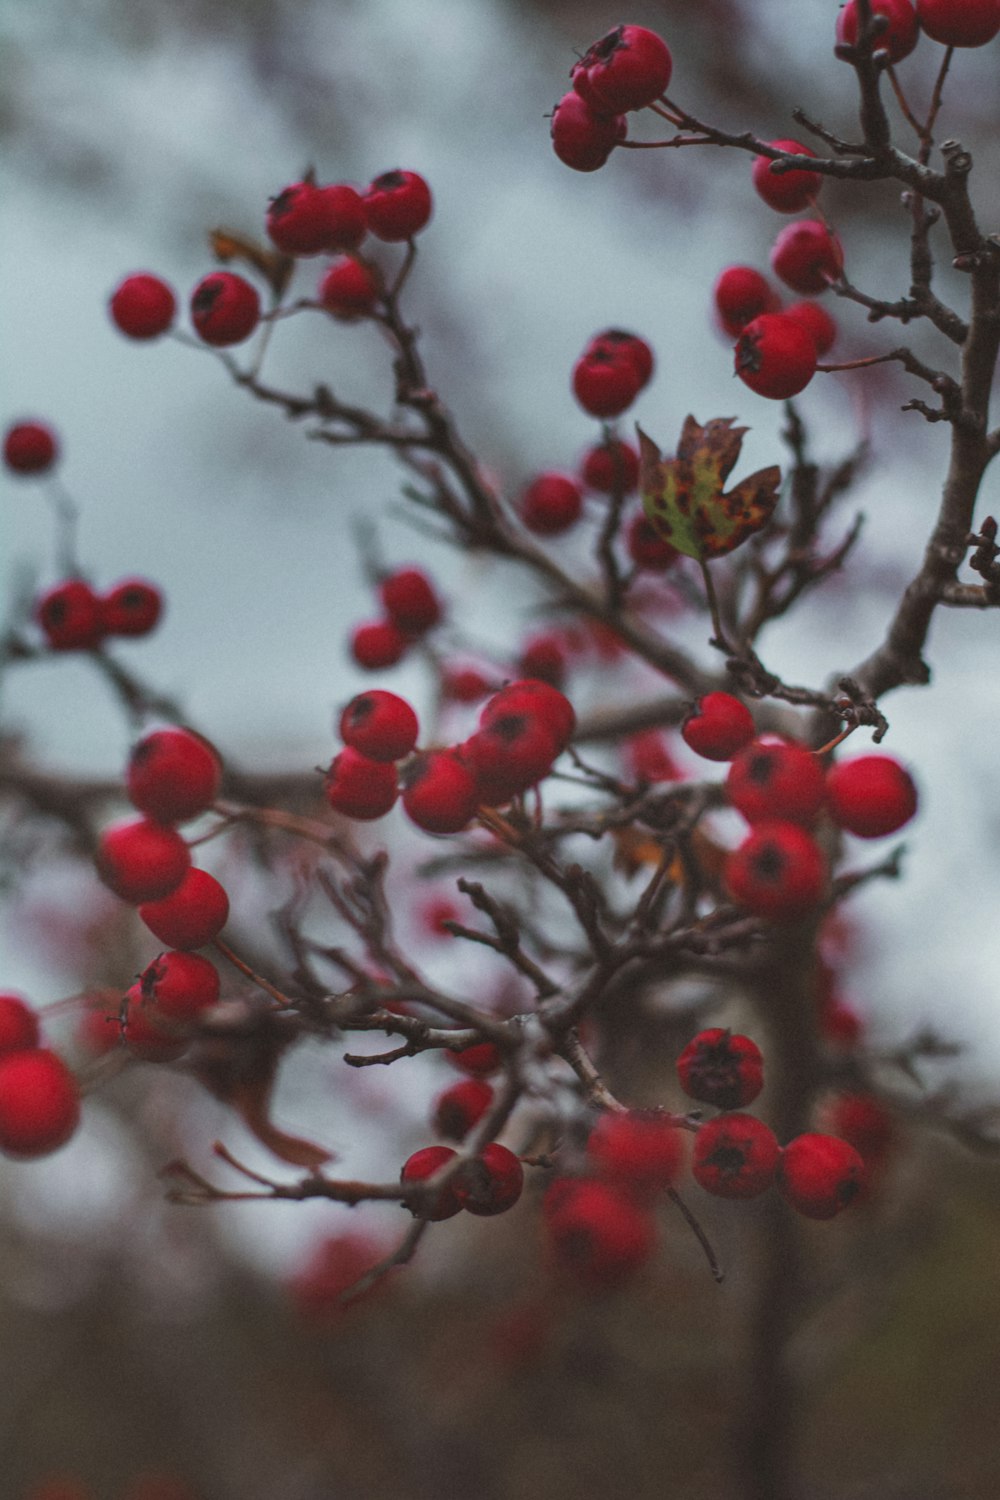 a close up of some berries